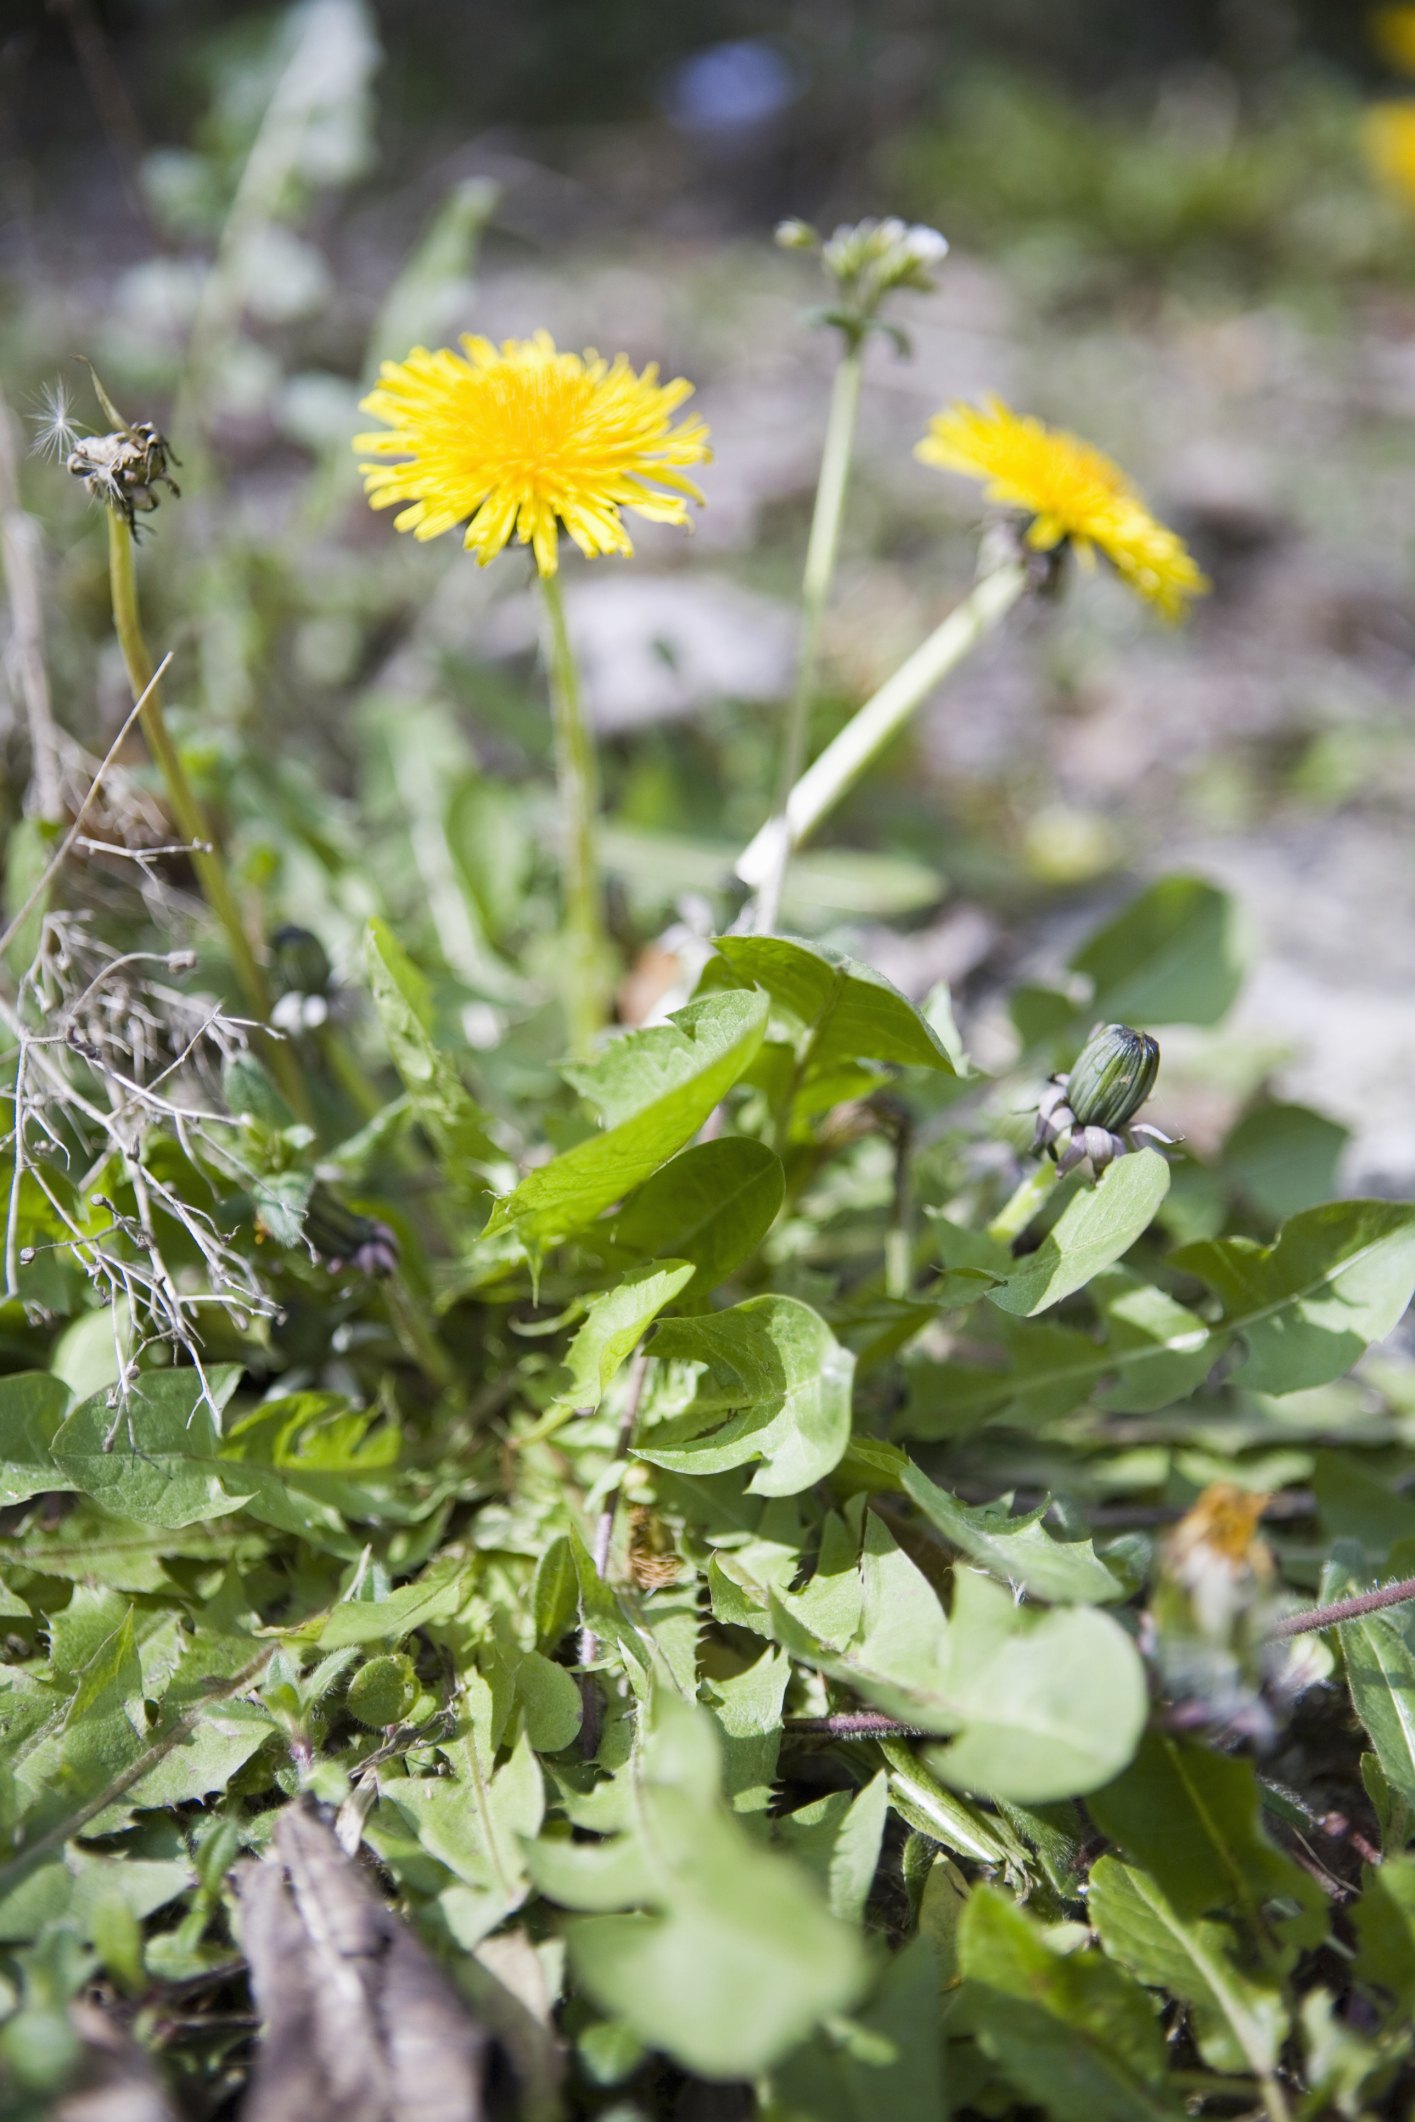 Organic Weed Control for Dandelions | eHow